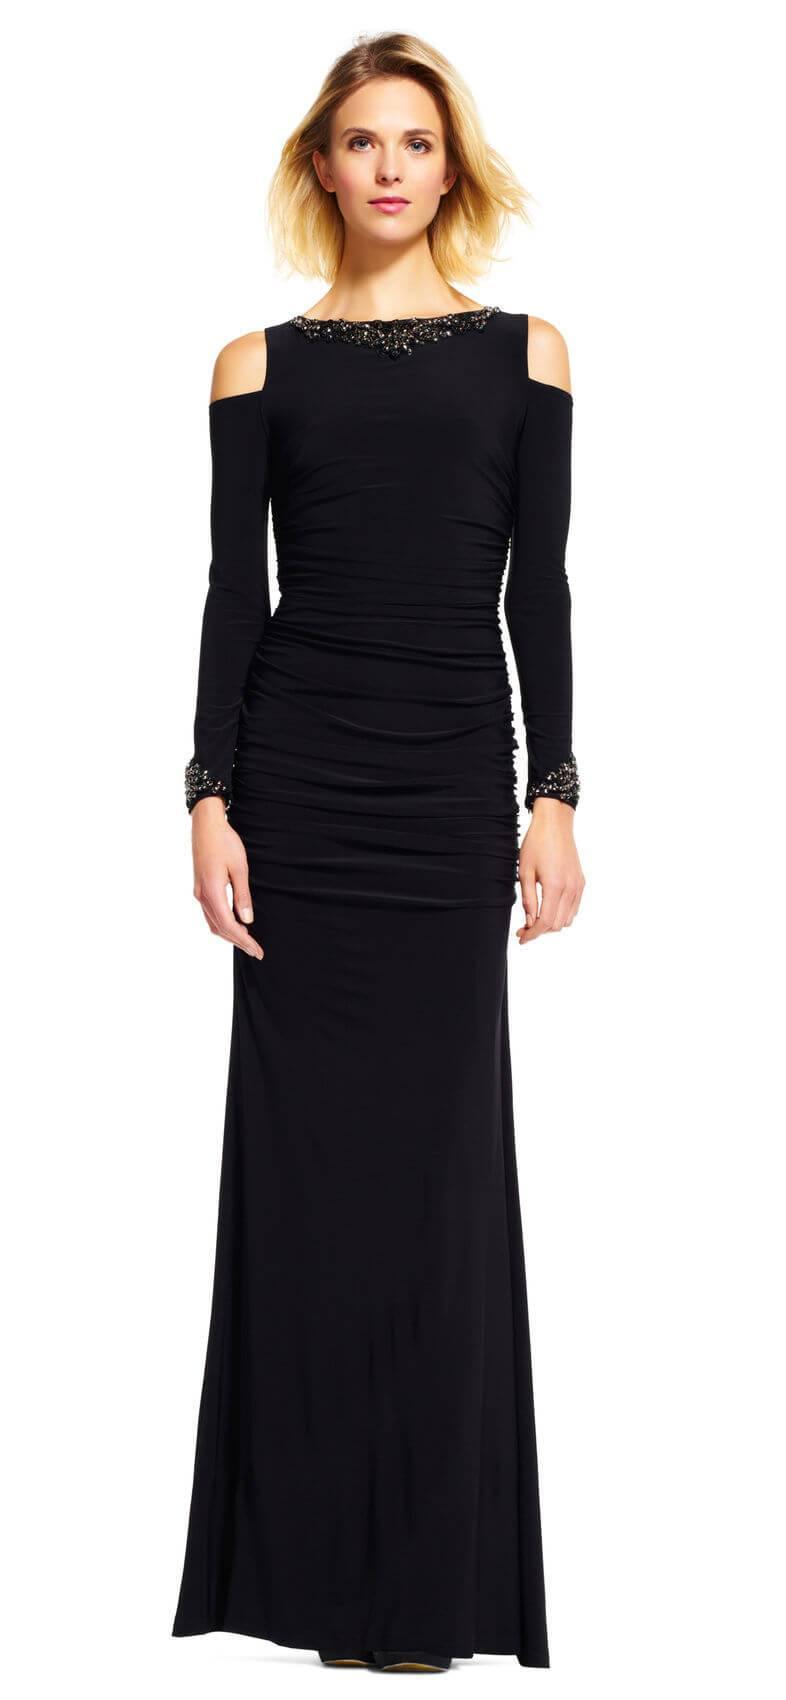 Adrianna Papell Long Formal Evening Dress - The Dress Outlet Adrianna Papell